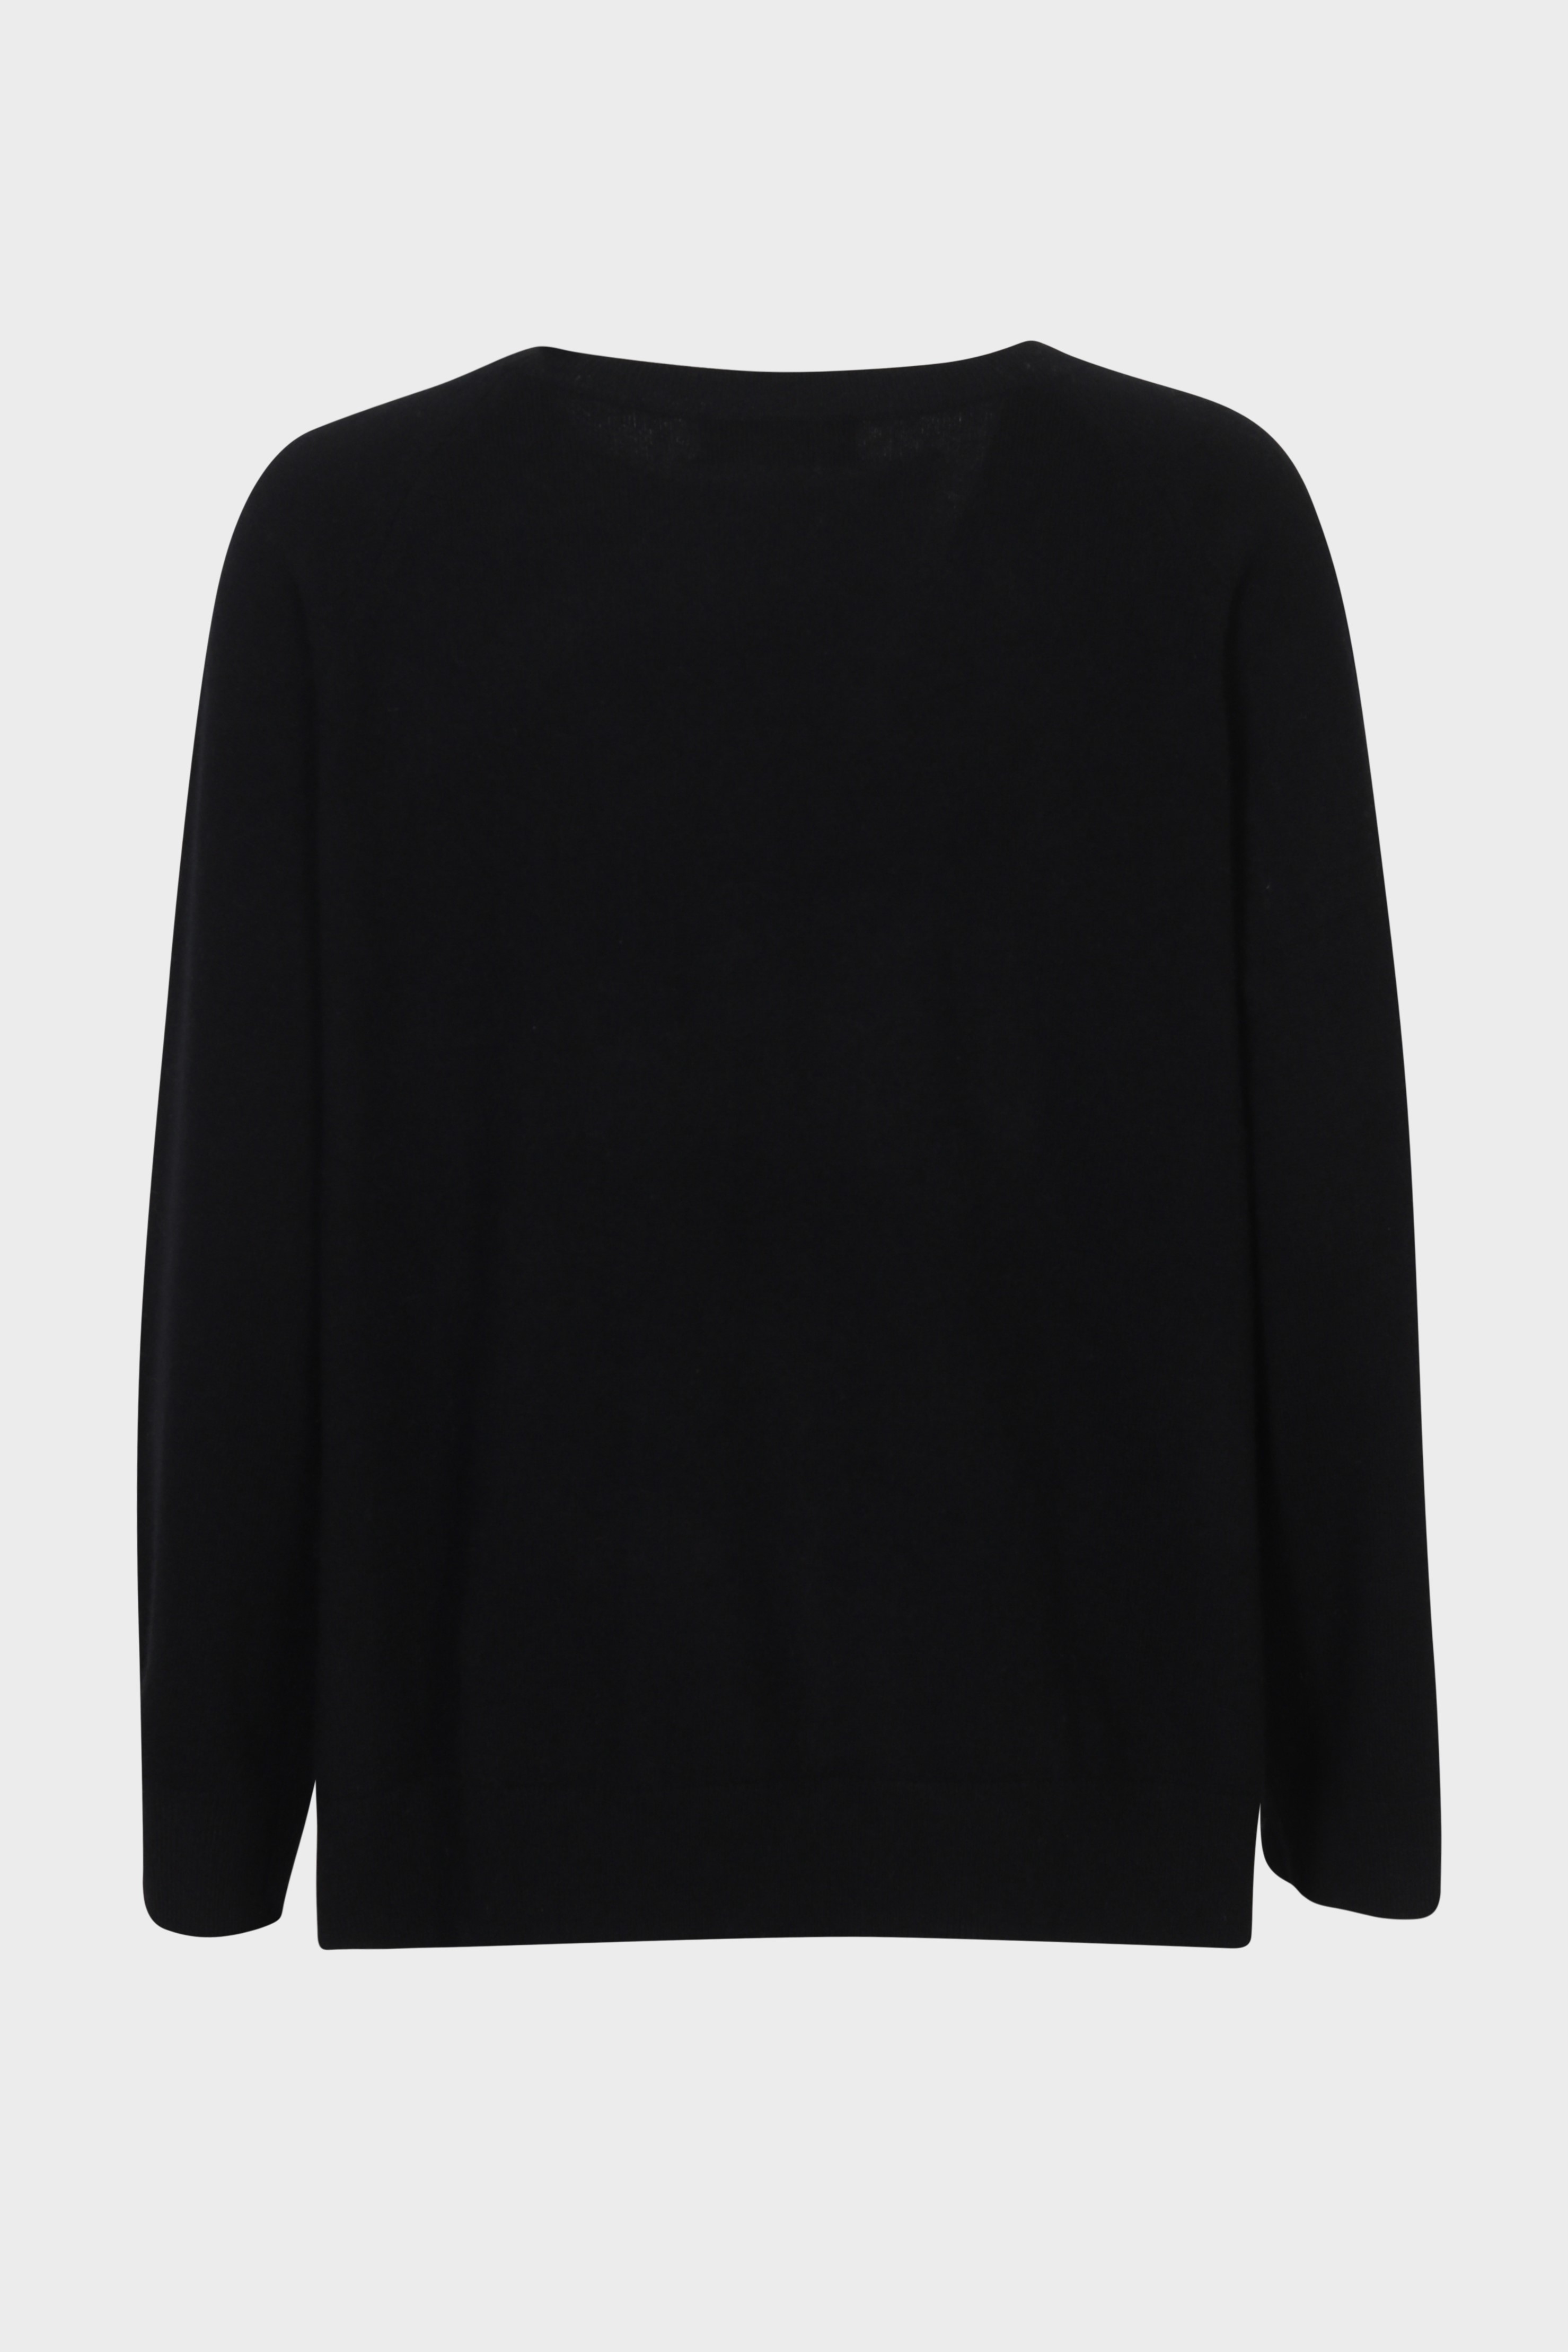 SMINFINITY Chilly Knit Pullover in Black XS/S